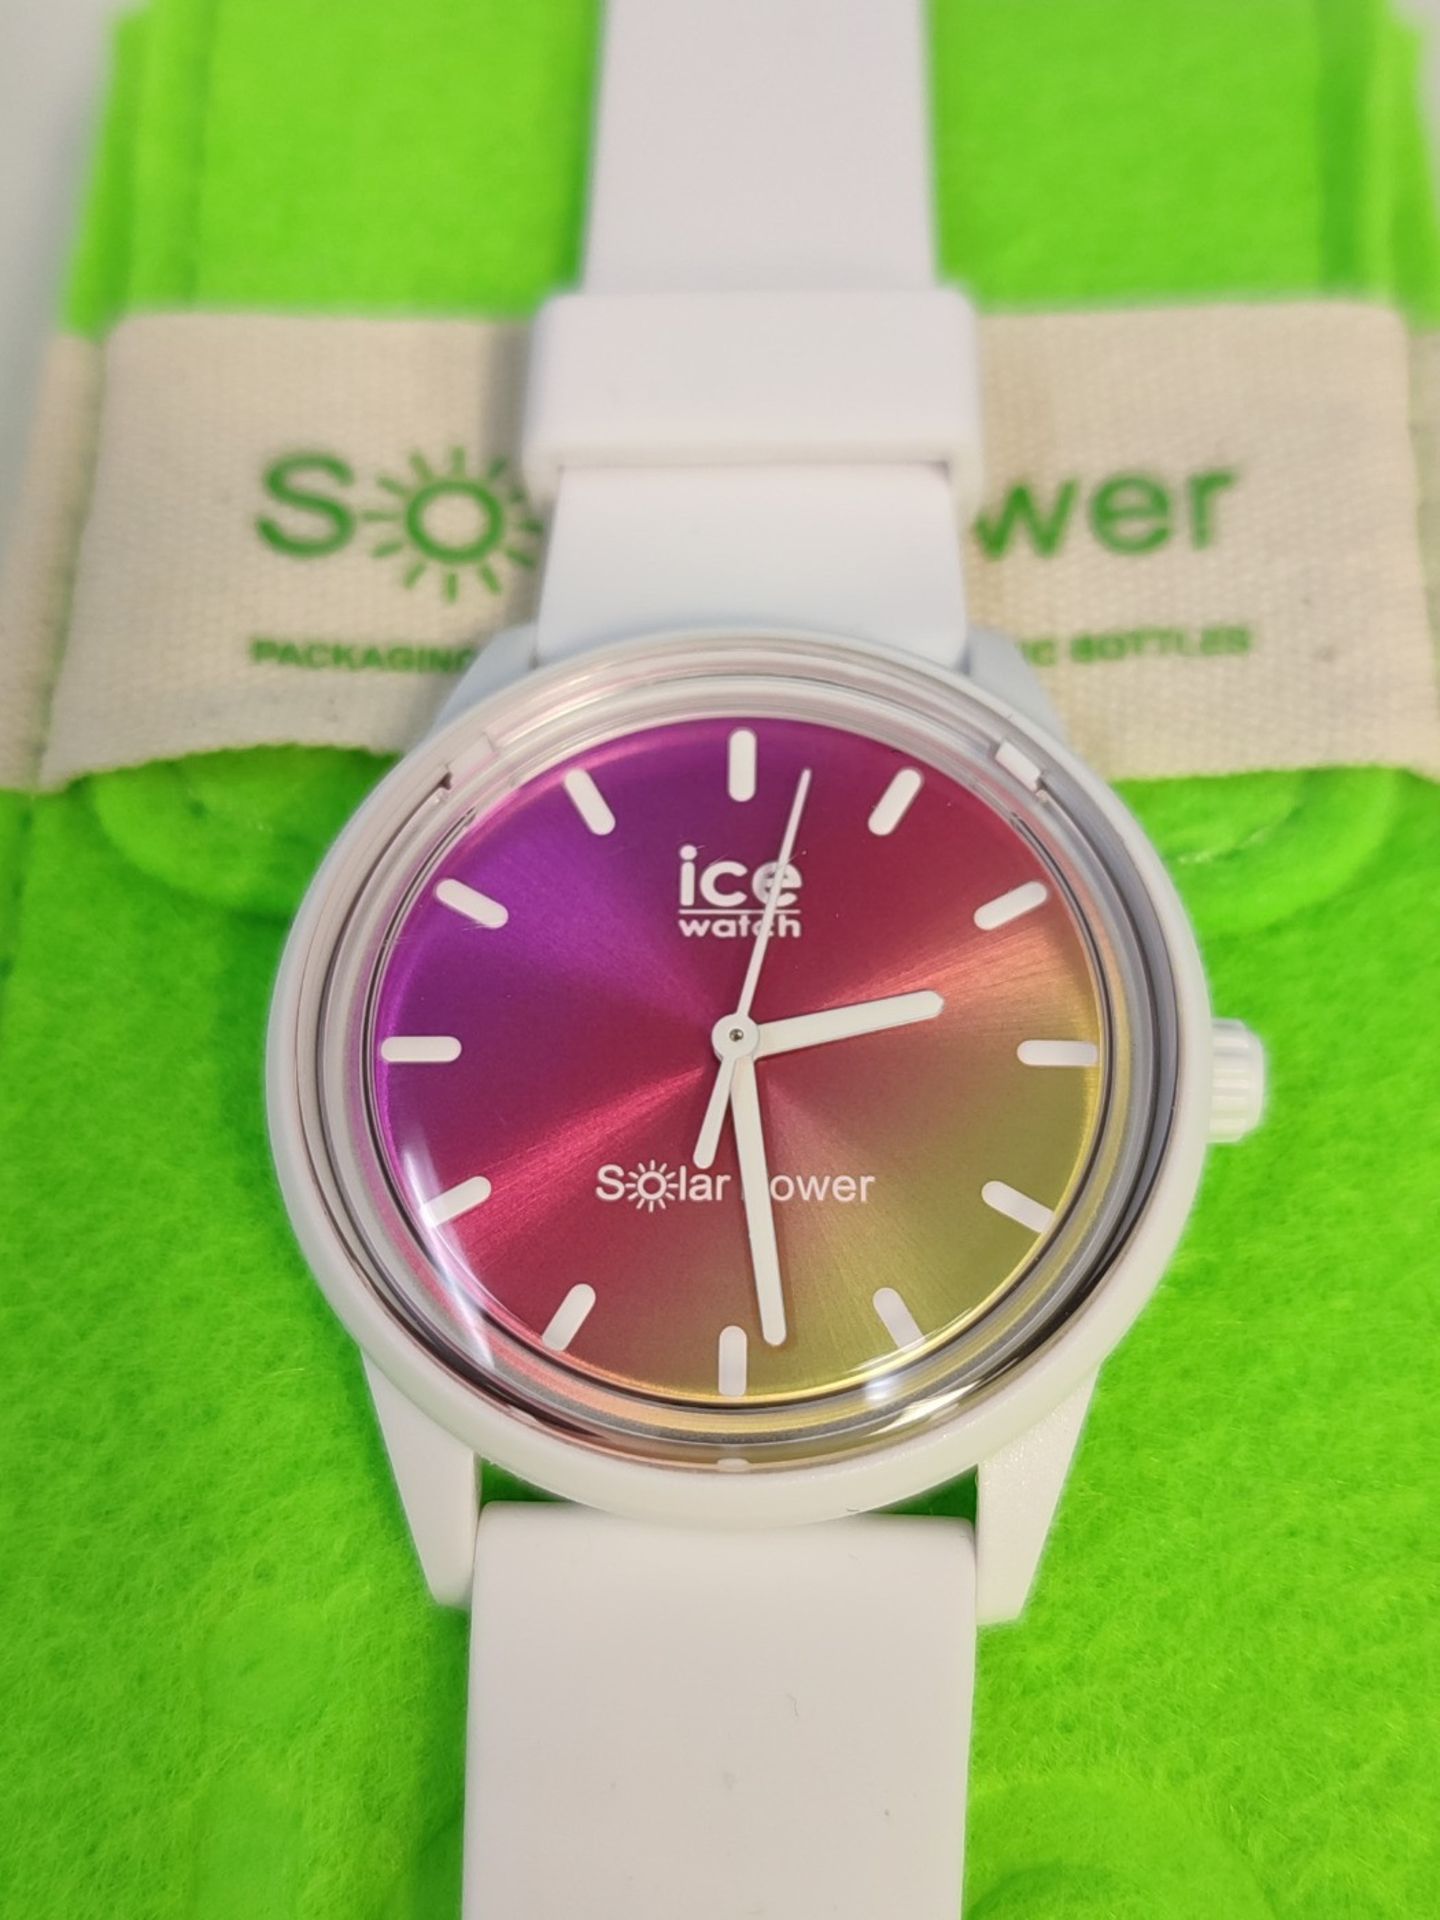 RRP £63.00 Ice-Watch - ICE solar power Sunset California - White women's watch with silicone stra - Image 5 of 6